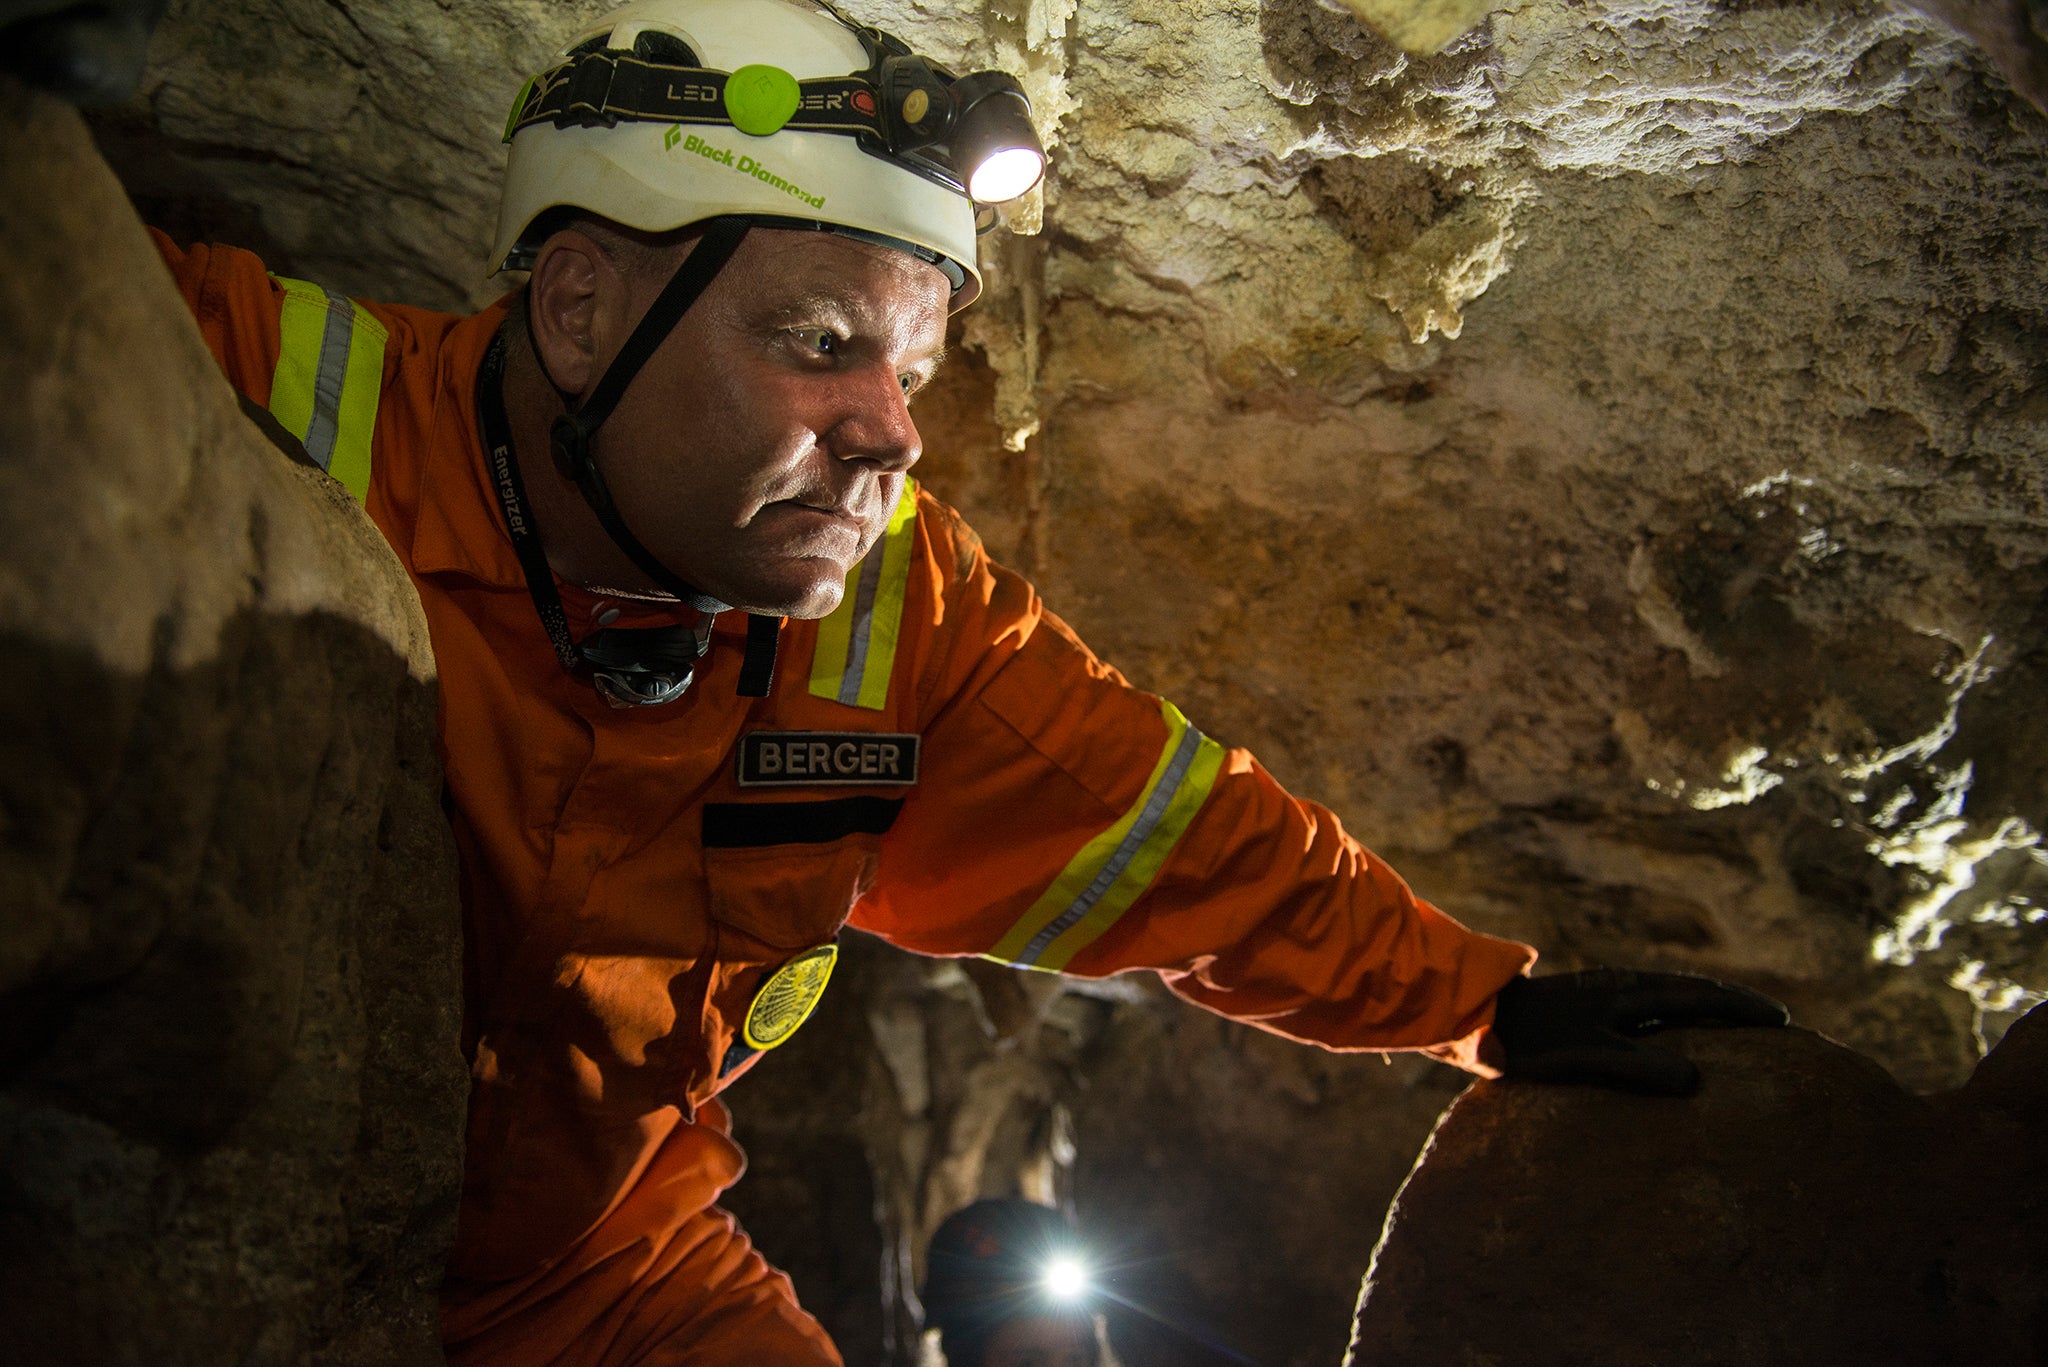 National Geographic Explorer-in-Residence Lee Berger and leader of the excavation expedition, inside the Rising Star cave in South Africa where fossil elements belonging to H. naledi, a new species of human relative, were discovered